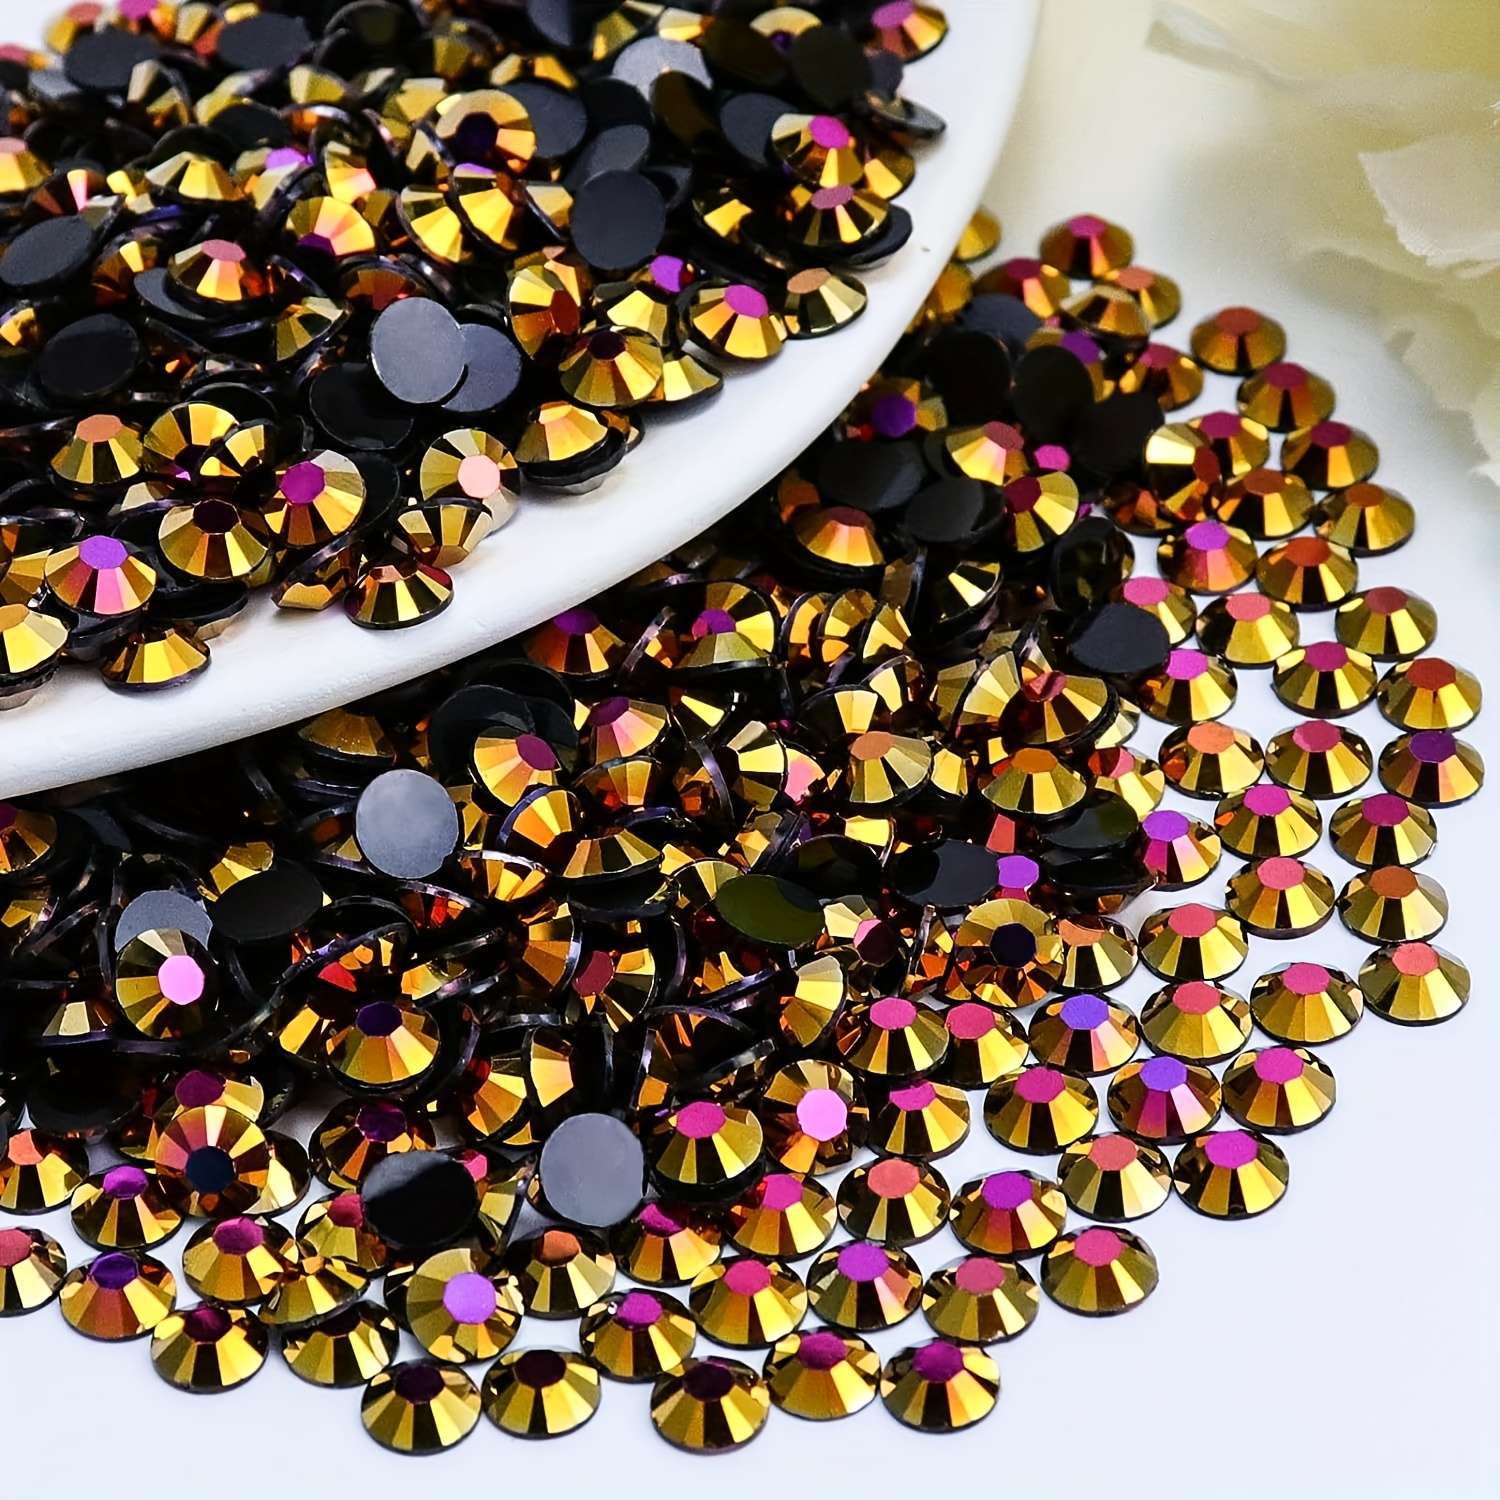 4000pcs 3mm Resin Rhinestone AB Color Round Flatback Jelly Resin  Rhinestones Glitter Diamond Stone for DIY Crafts Face Makeup Cups Bottles  Tumblers